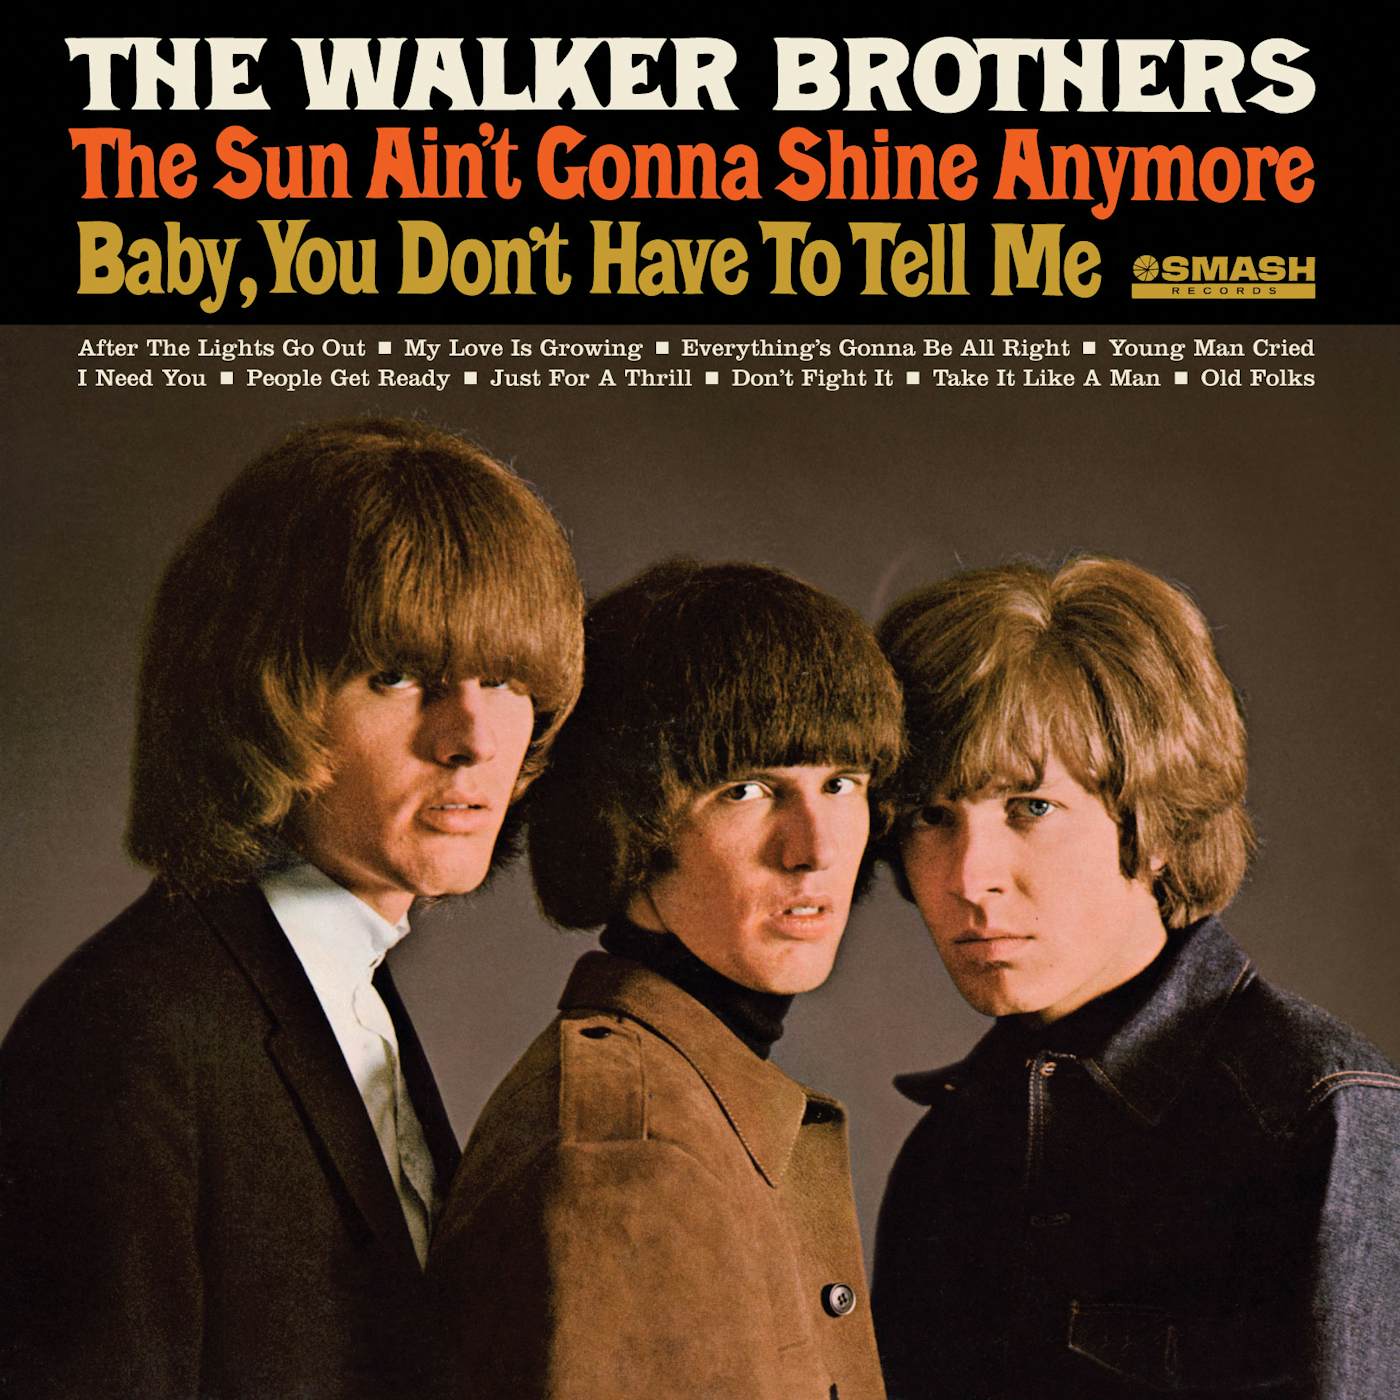 The Walker Brothers Sun Ain't Gonna Shine Anymore Vinyl Record